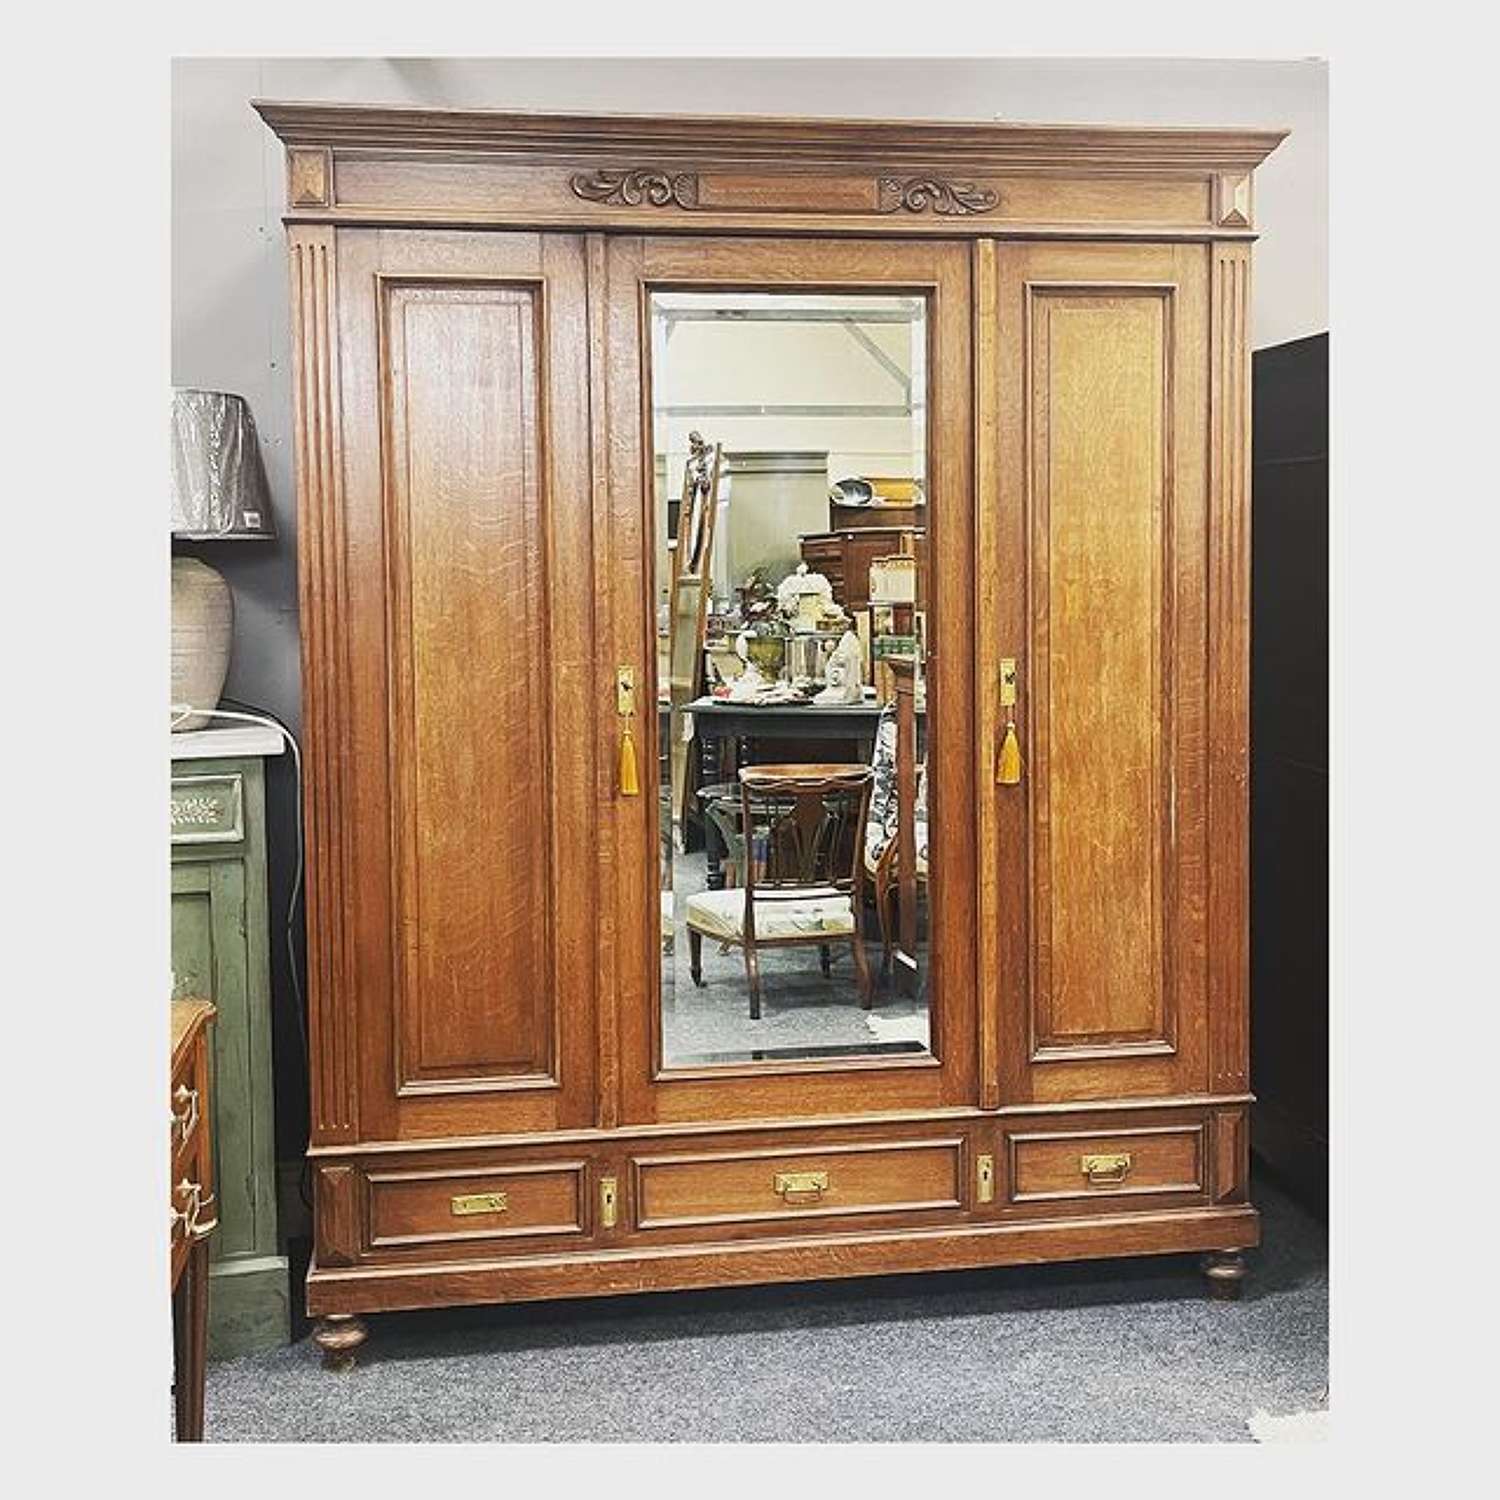 Large French oak wardrobe with mirror